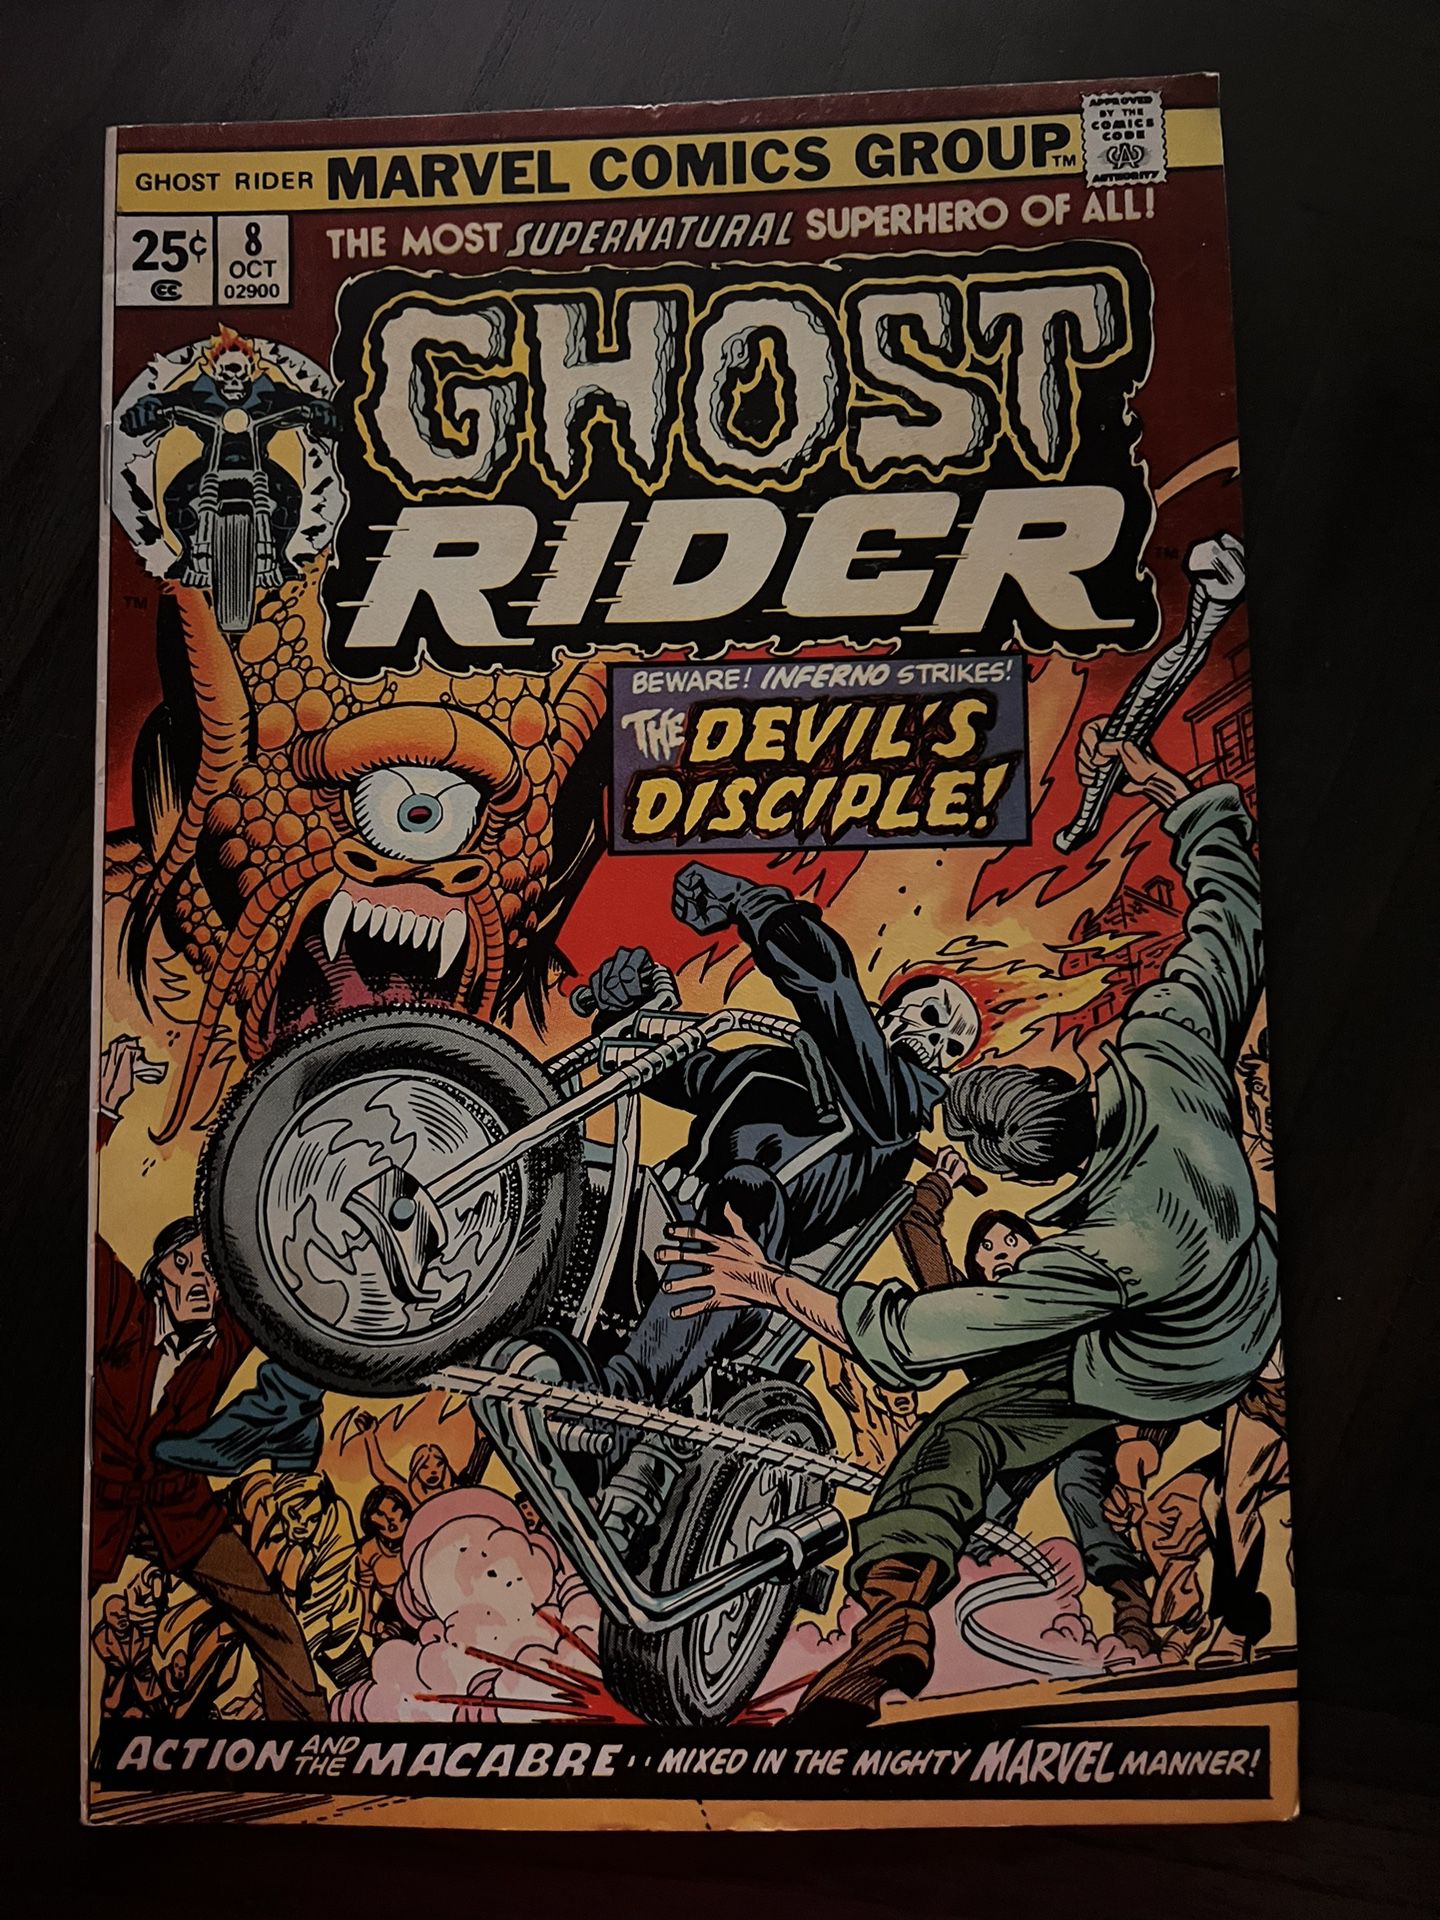 marvel comics ghost rider #8 in mint condition 